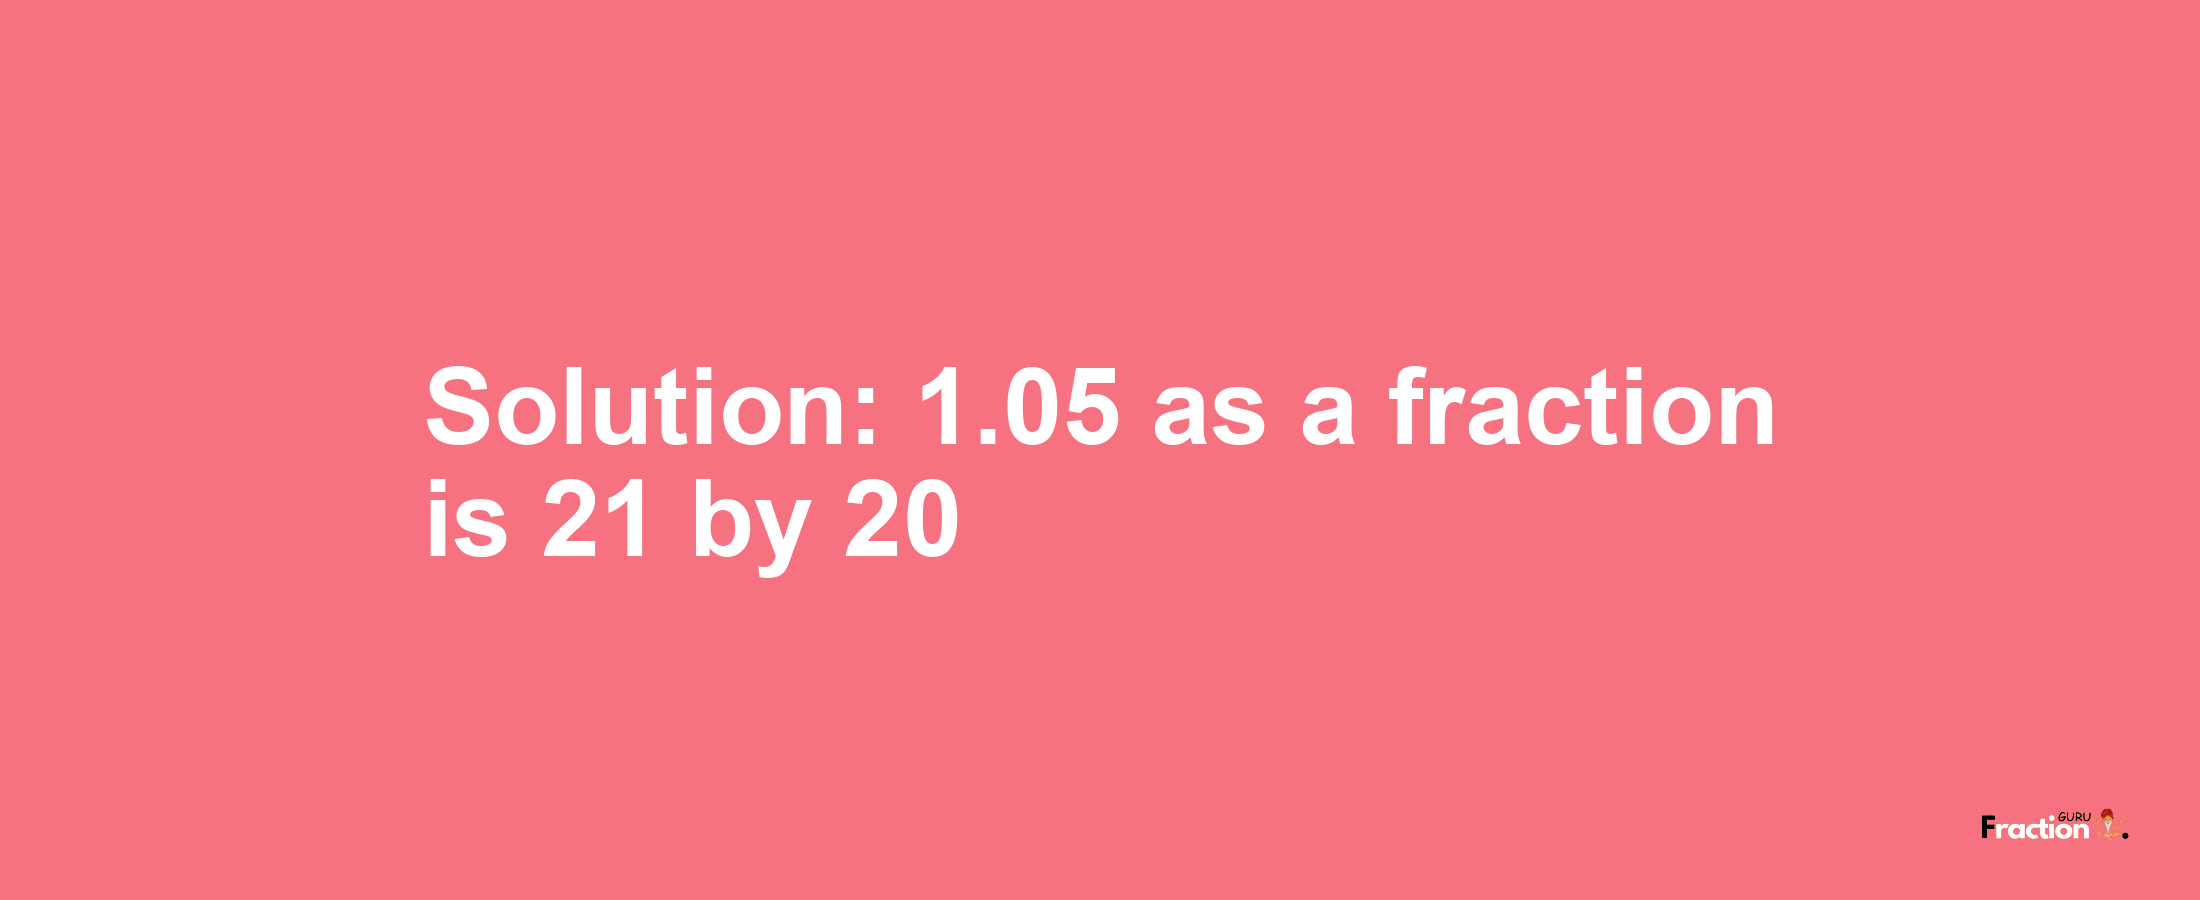 Solution:1.05 as a fraction is 21/20